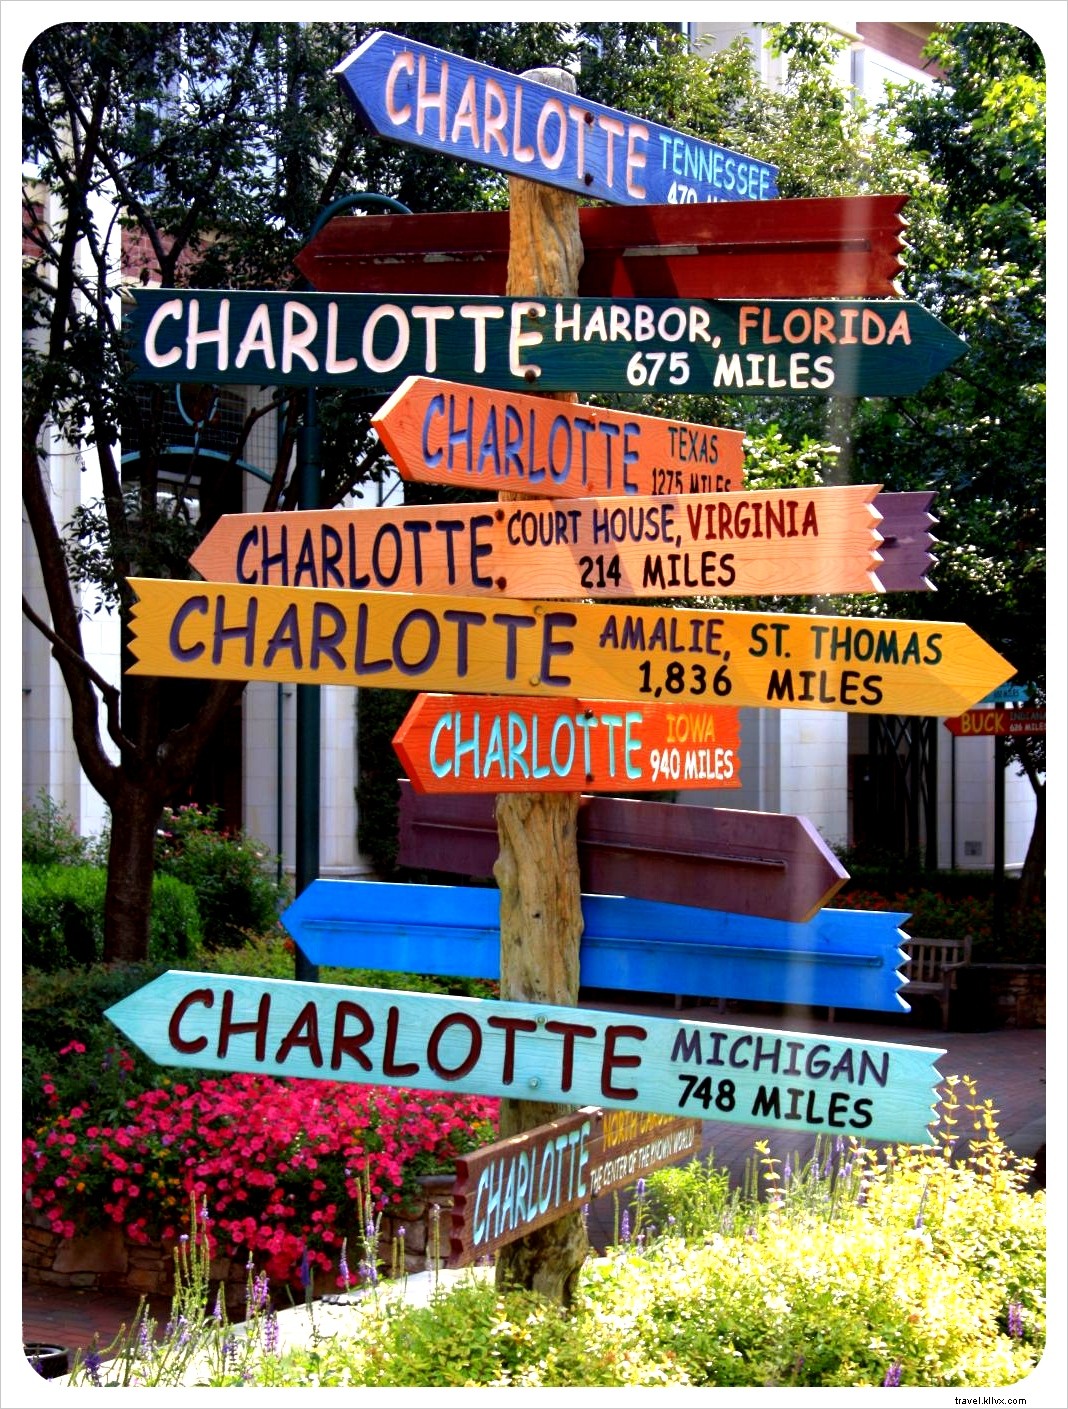 Great American Road Trip - The Carolinas:From Charlotte to Charleston